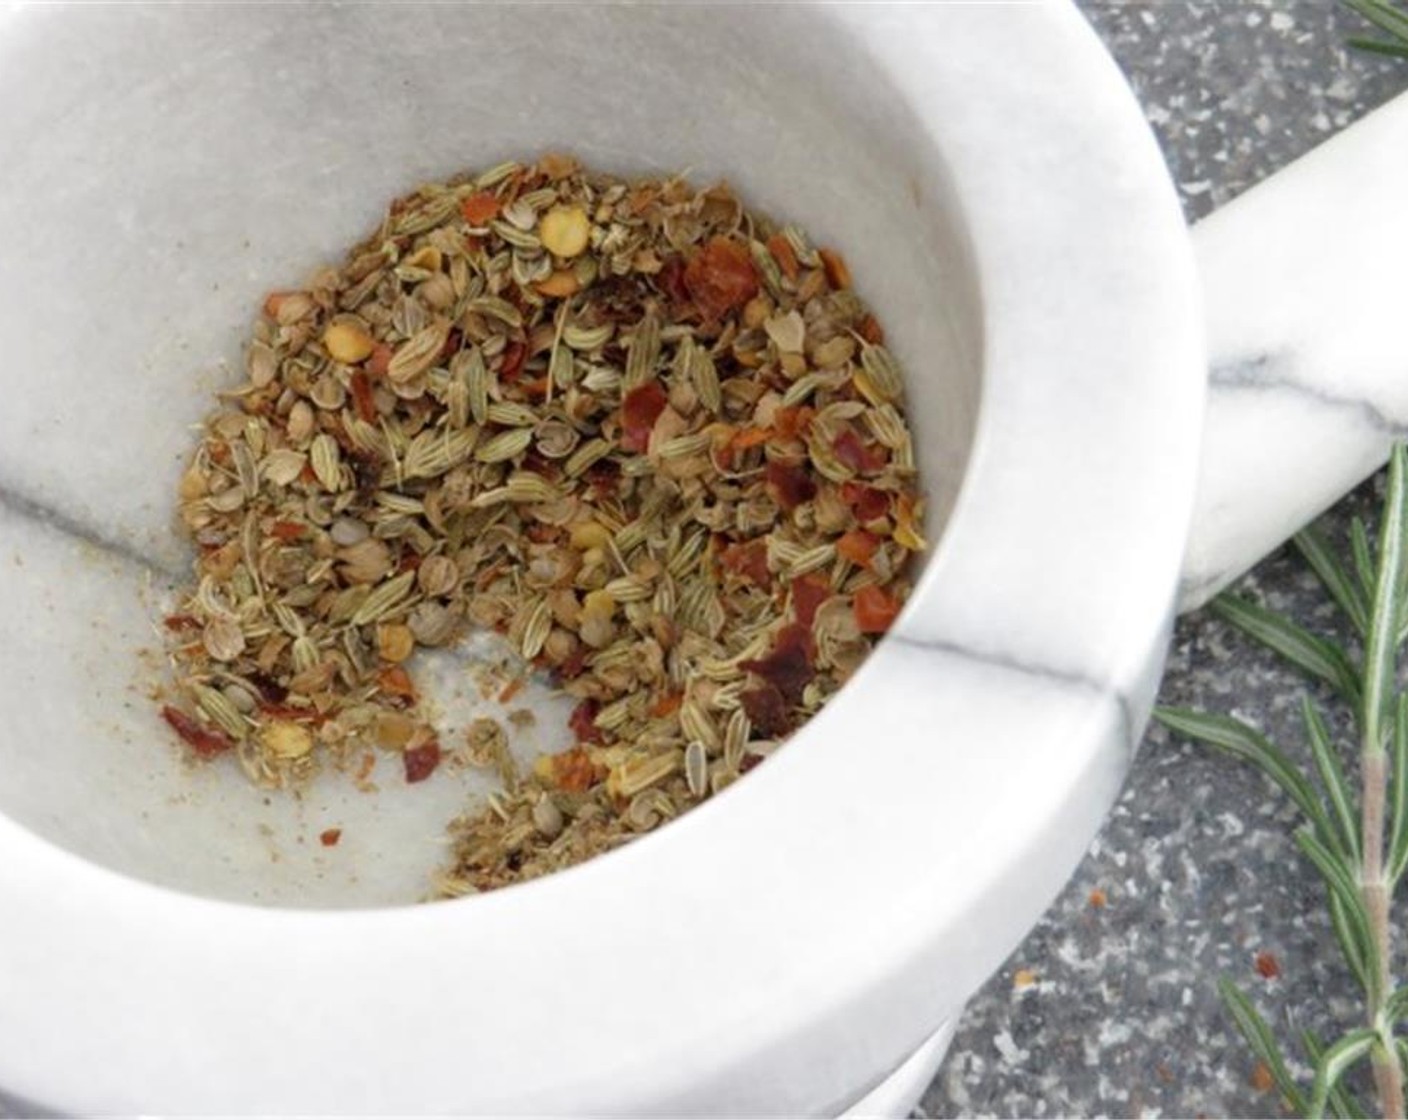 step 1 In a mortar and pestle, combine Whole Whole Coriander Seeds (3/4 tsp), Fennel Seeds (1 1/4 tsp), and Crushed Red Pepper Flakes (1/2 tsp). Use the pestle to crack and grind the spices in the mortar until the spices are crushed and fragrant.